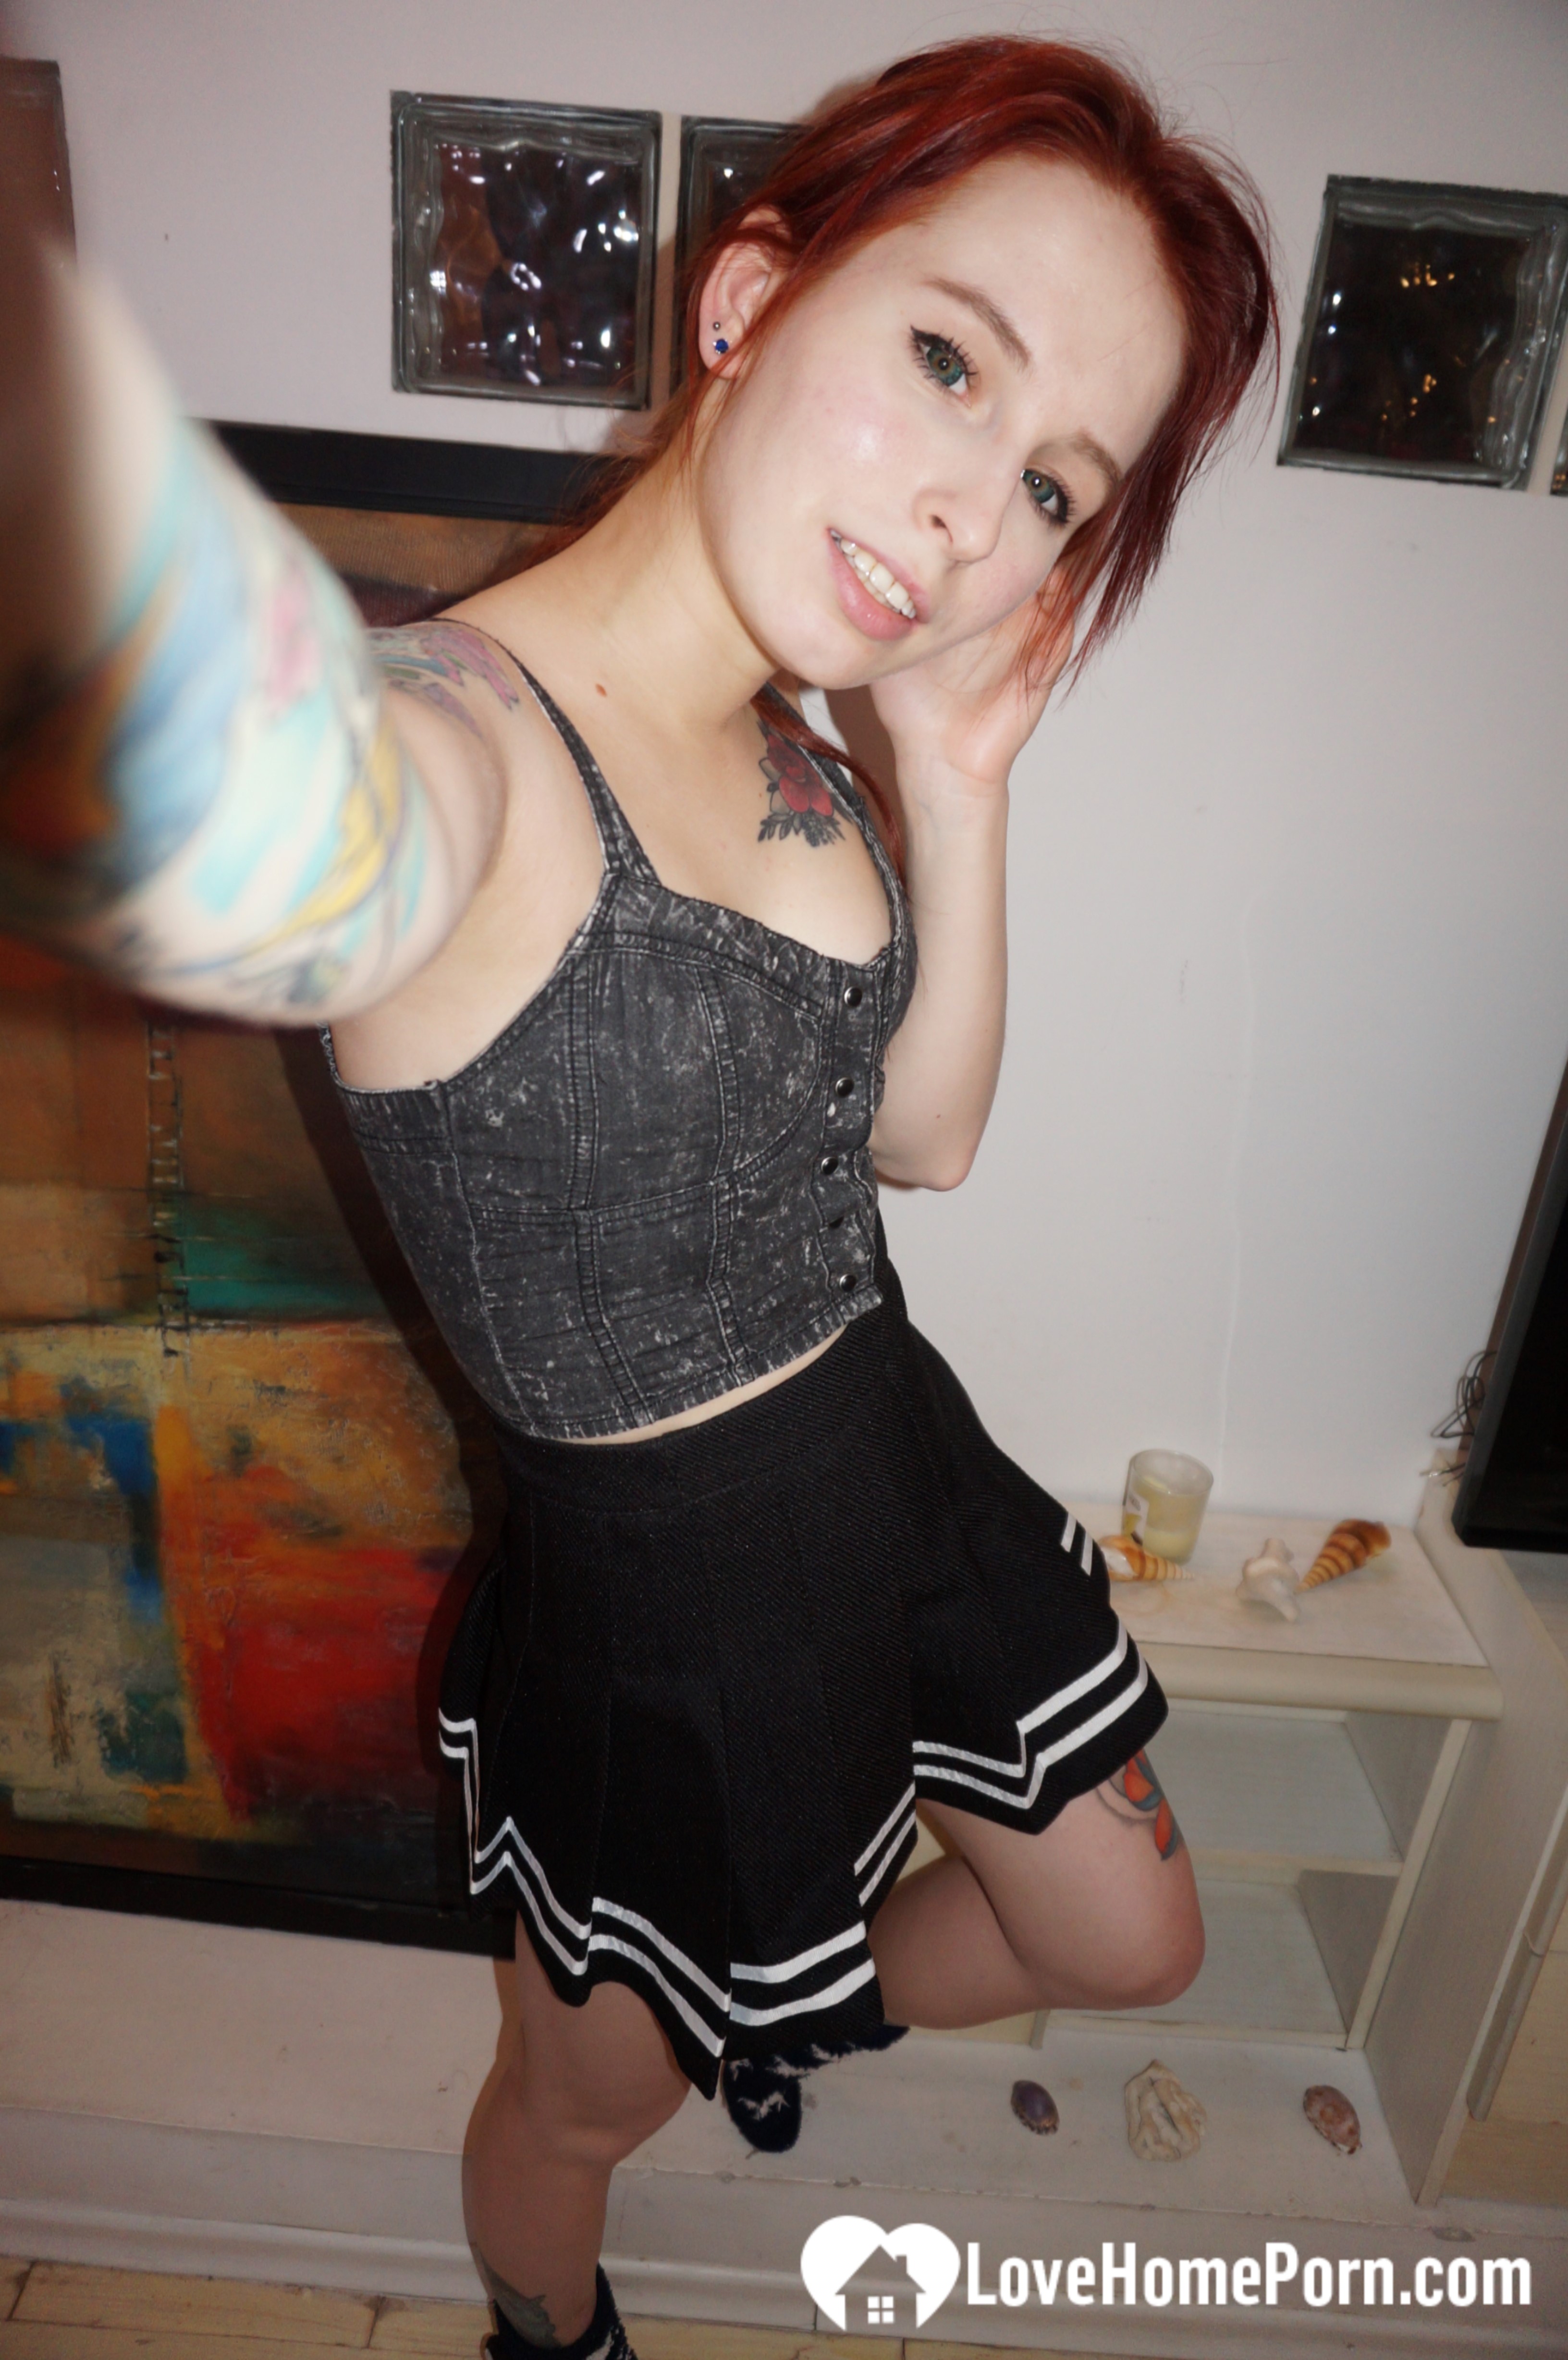 Desirable redhead painter showing off sexy outfits